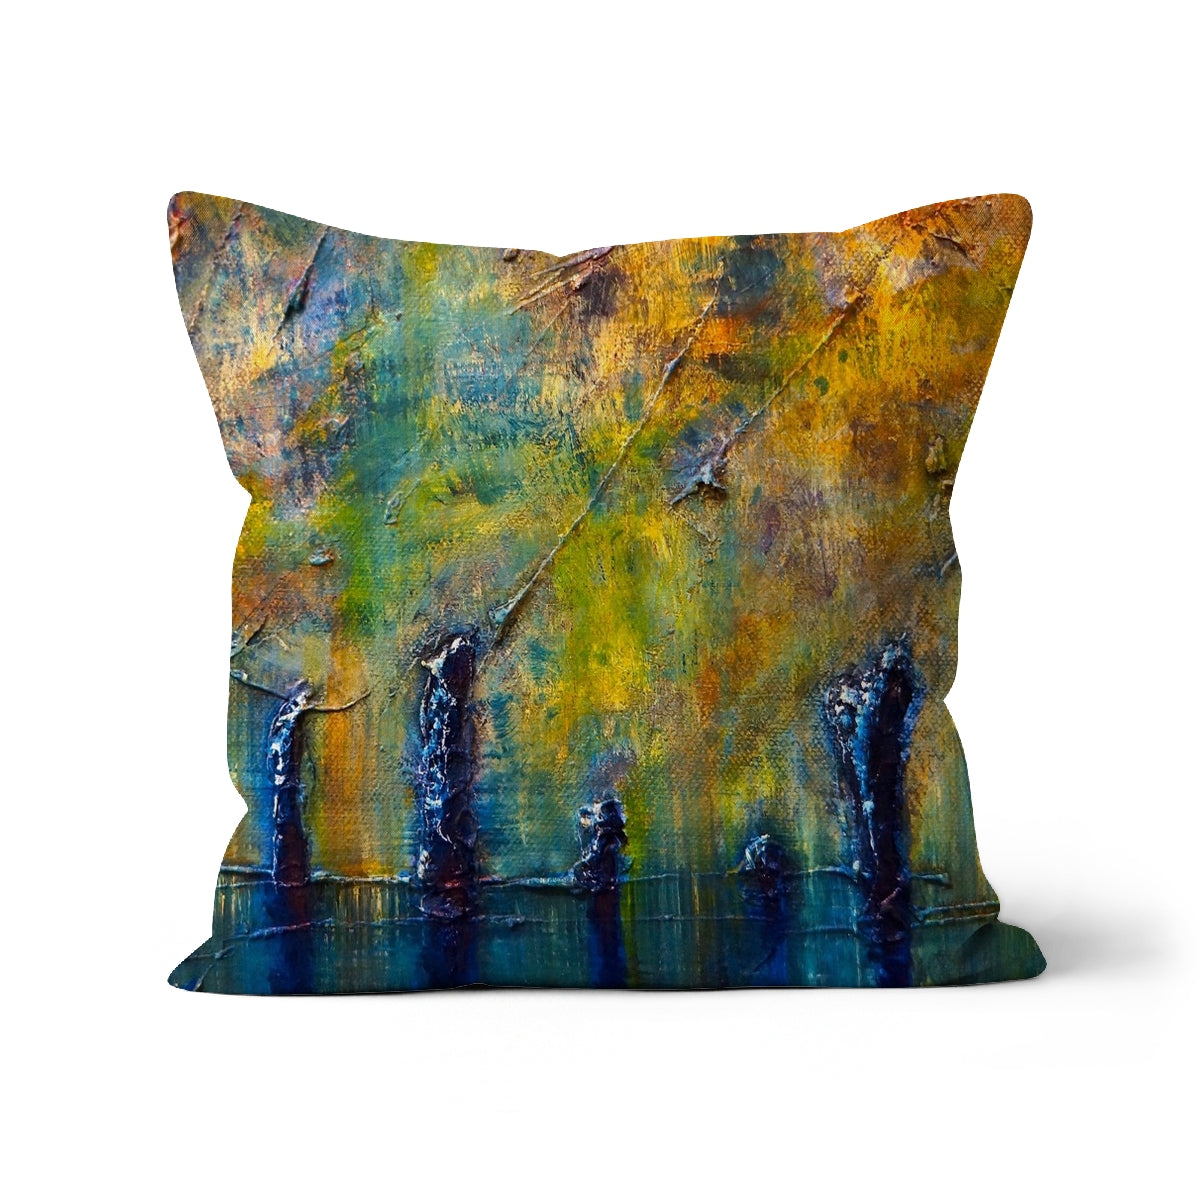 Stenness Moonlight Orkney Art Gifts Cushion-Cushions-Orkney Art Gallery-Canvas-12"x12"-Paintings, Prints, Homeware, Art Gifts From Scotland By Scottish Artist Kevin Hunter